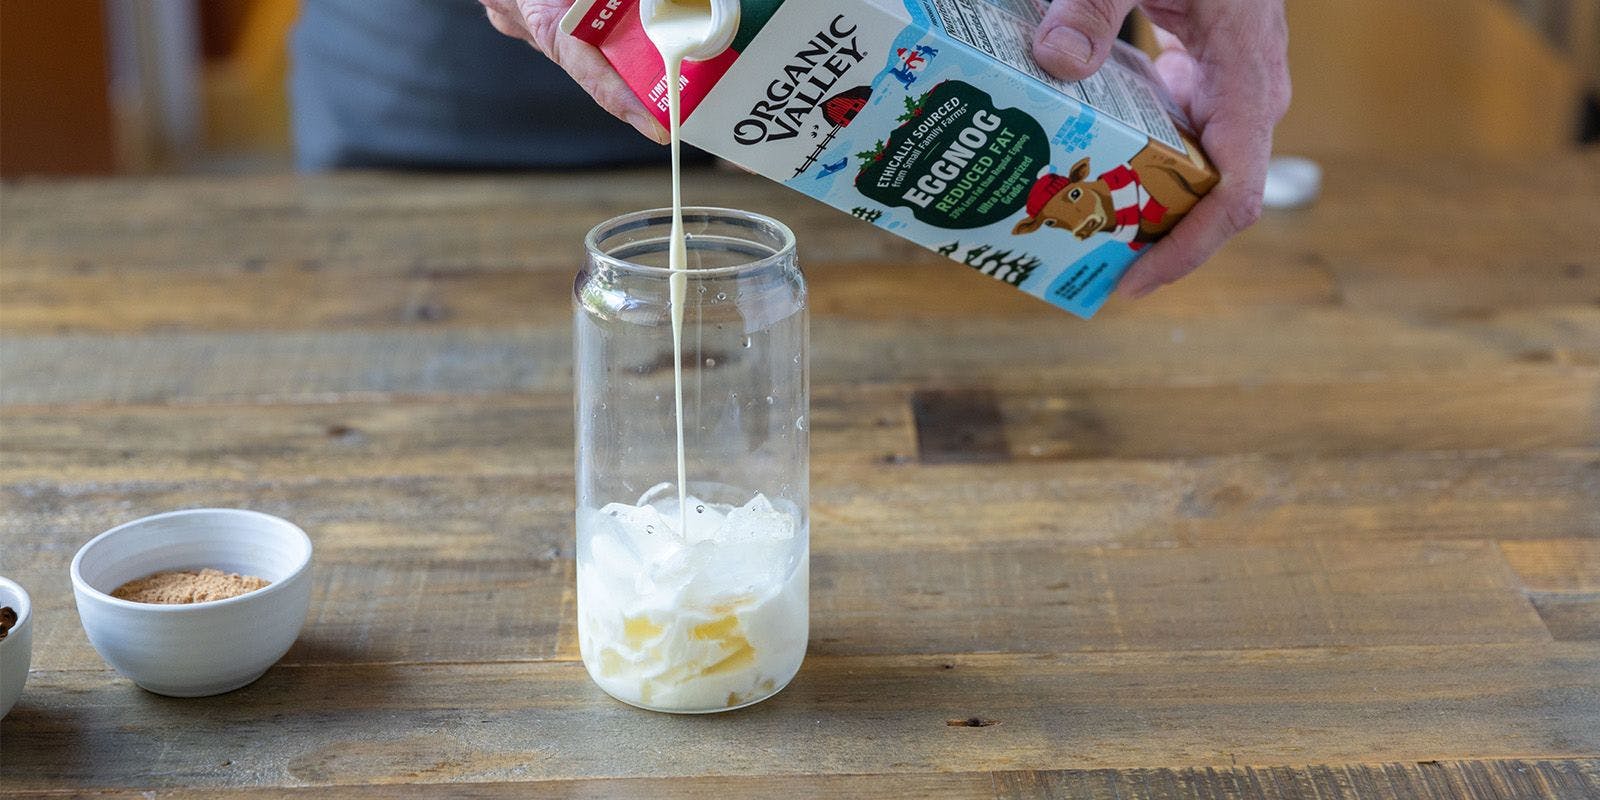 Pouring Organic Valley Eggnog in a glass.